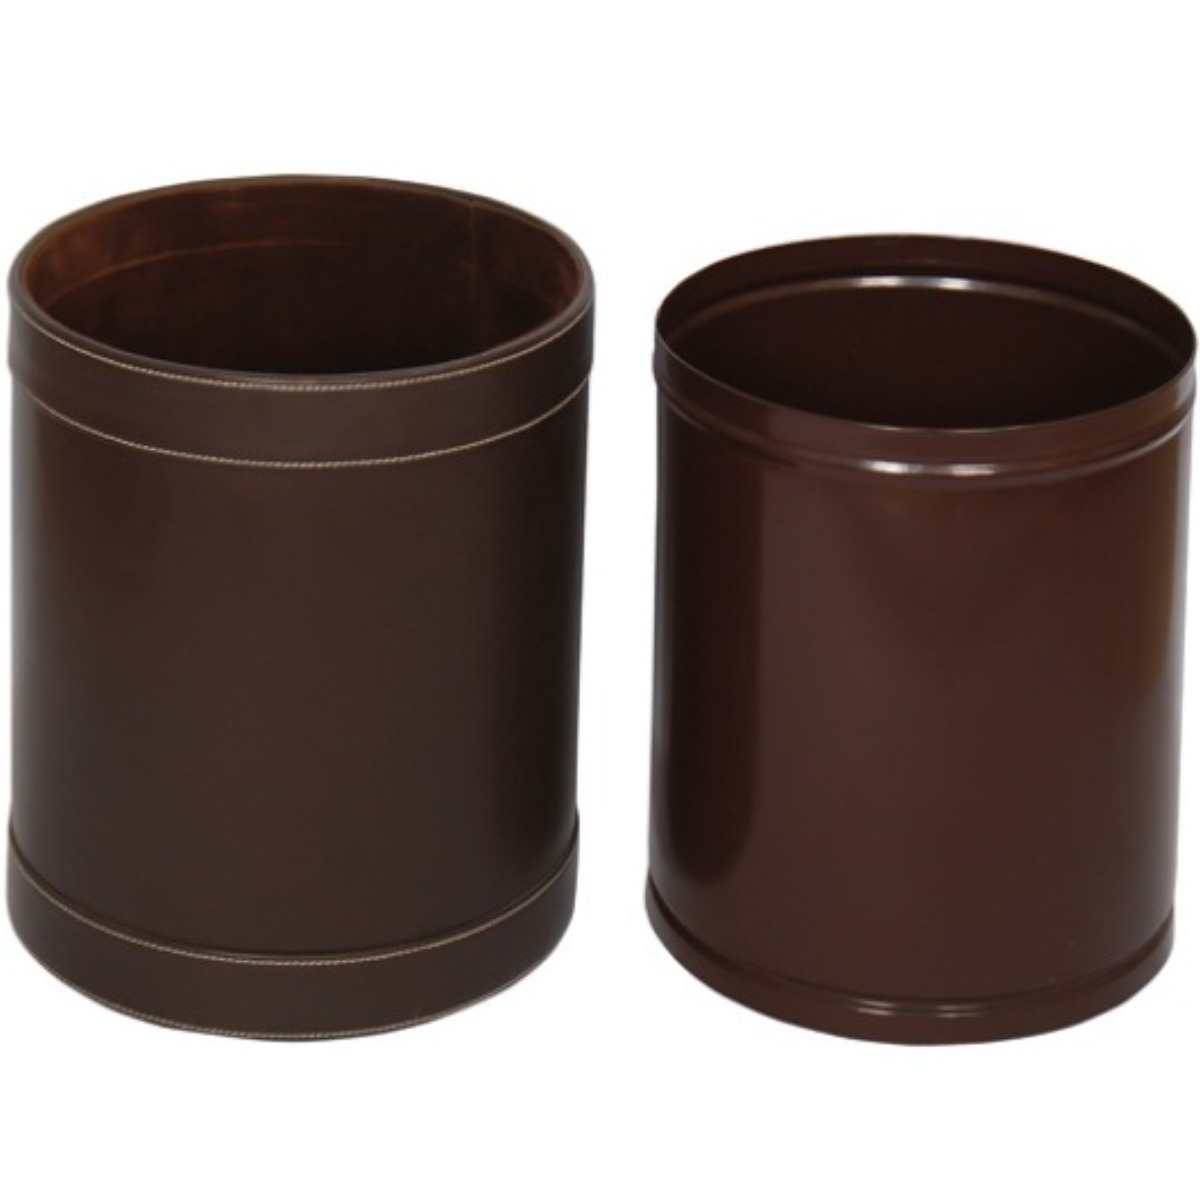 AB-305 Leather Lined Dustbin